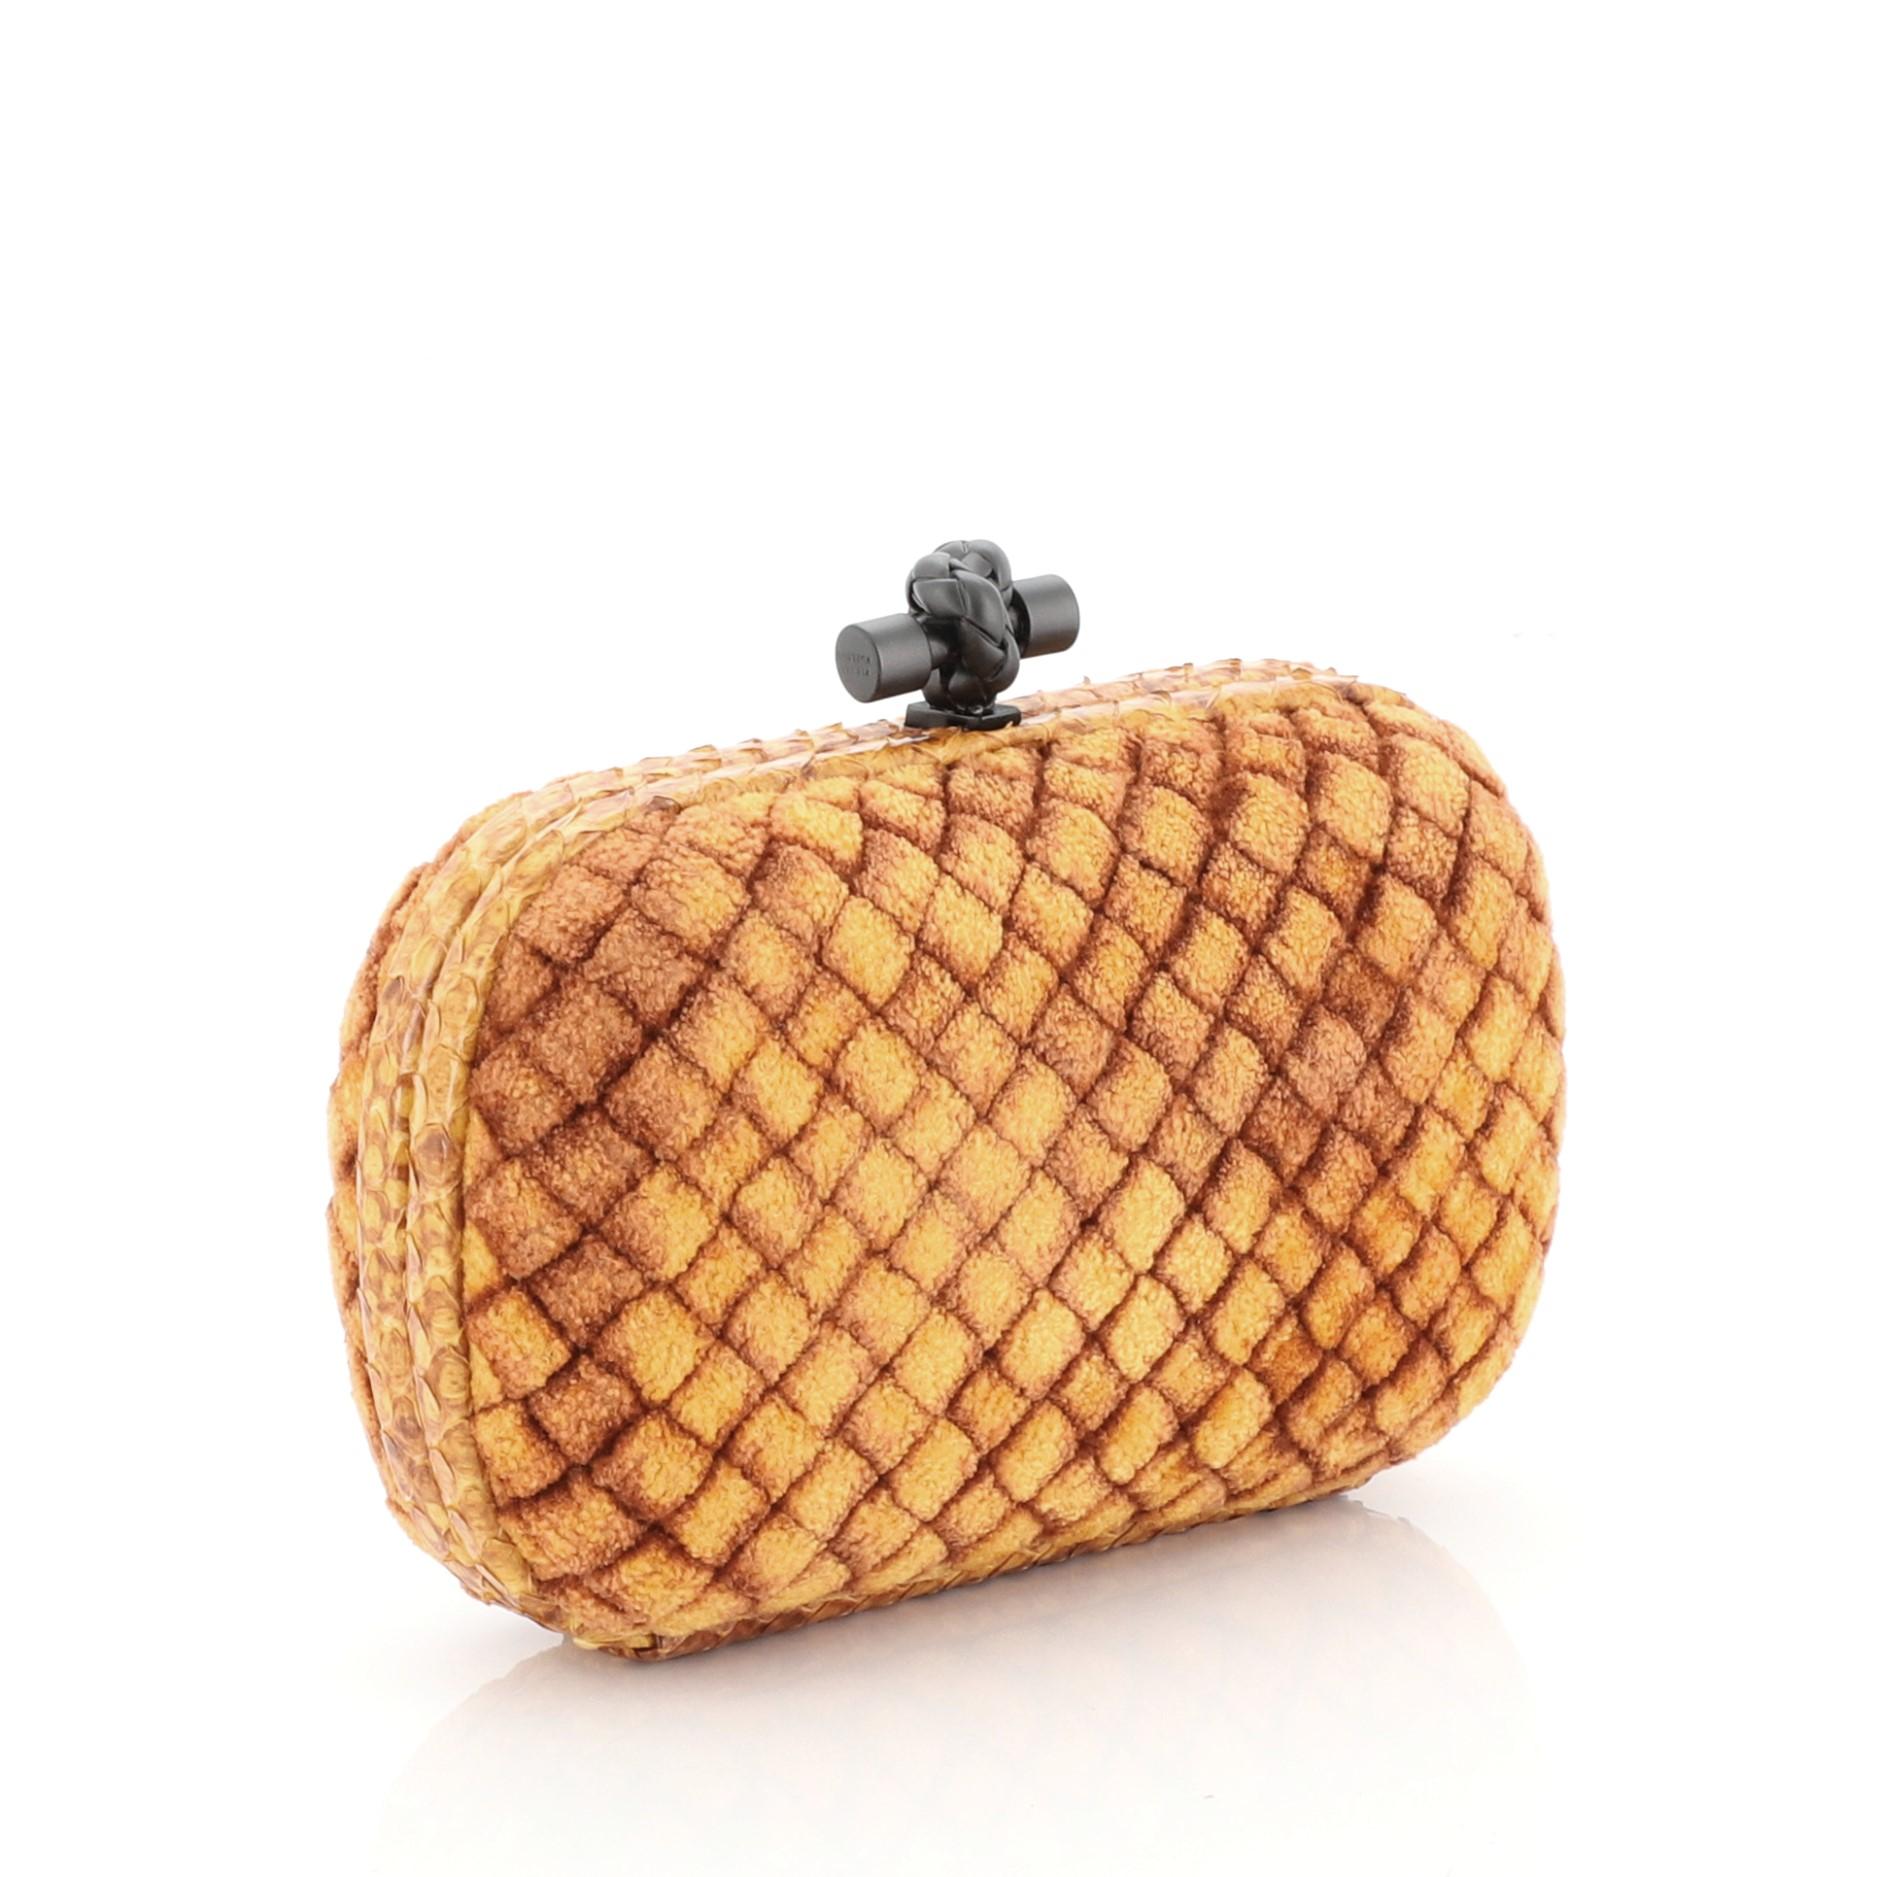 This Bottega Veneta Box Knot Clutch Velvet with Snakeskin Small, crafted from orange velvet, features snakeskin frame trims and matte gunmetal-tone hardware. Its top knot clasp closure opens to an orange leather interior  

Estimated Retail Price: